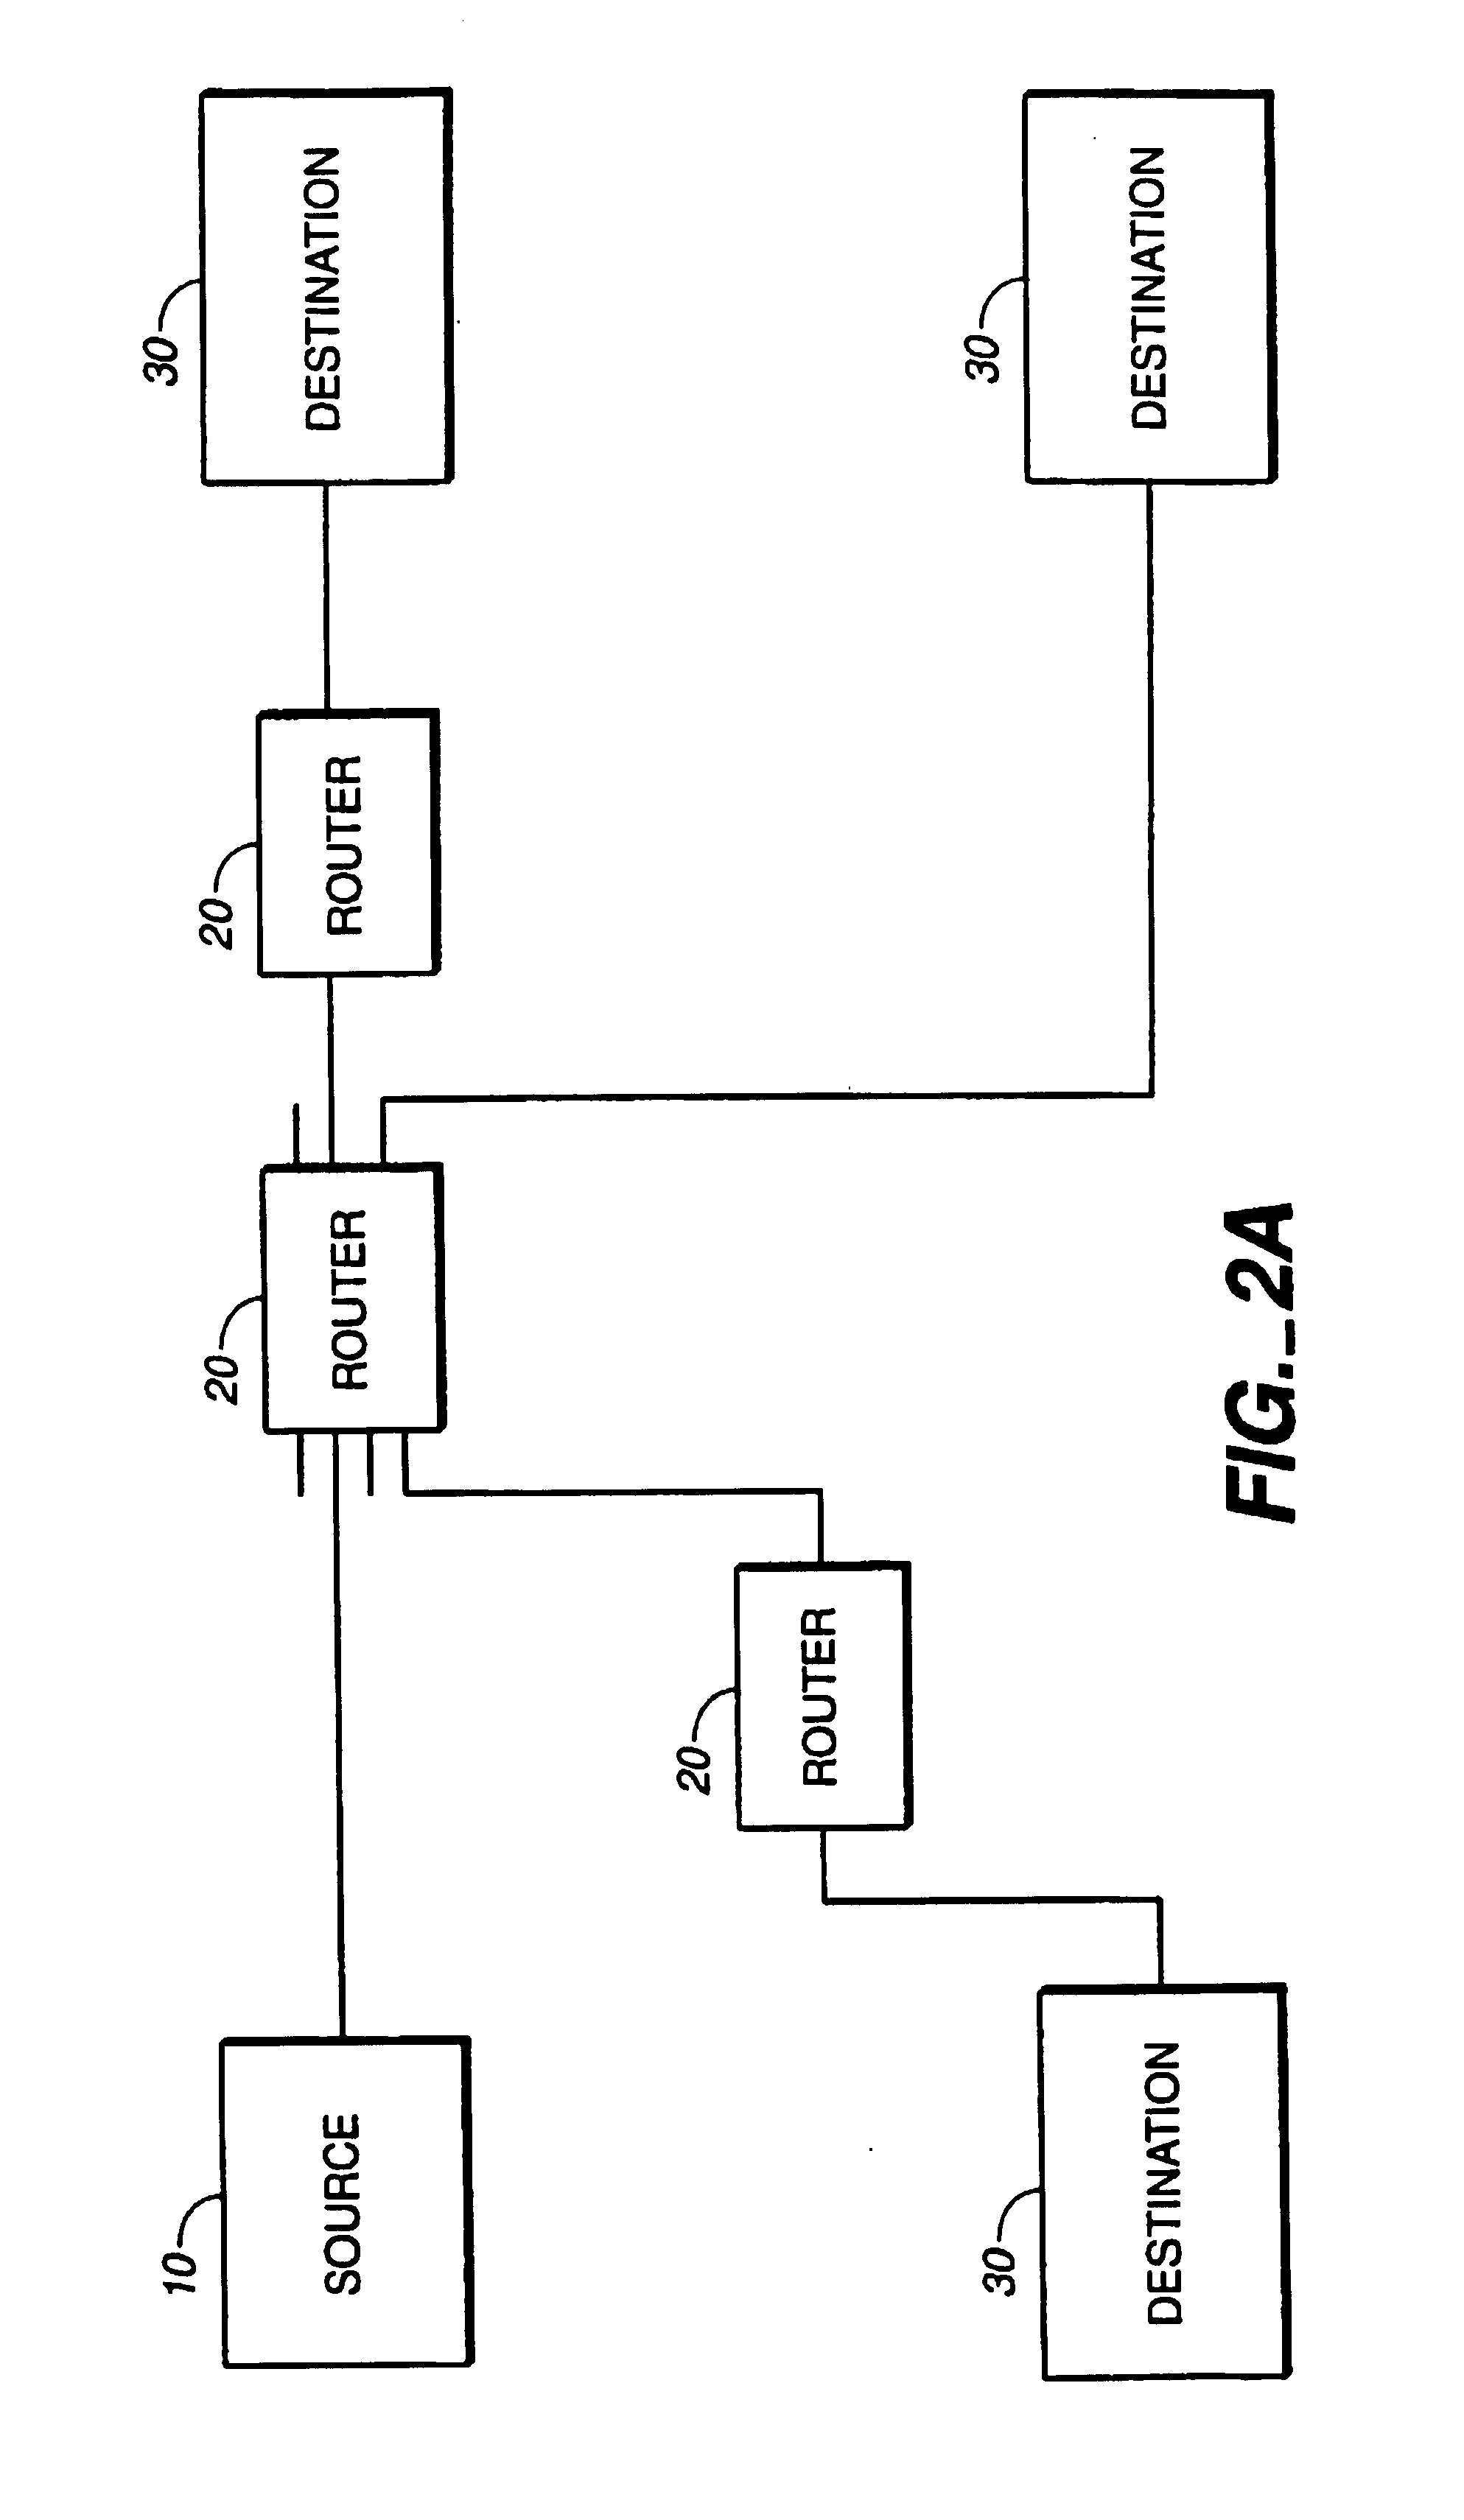 Separation of data and control in a switching device